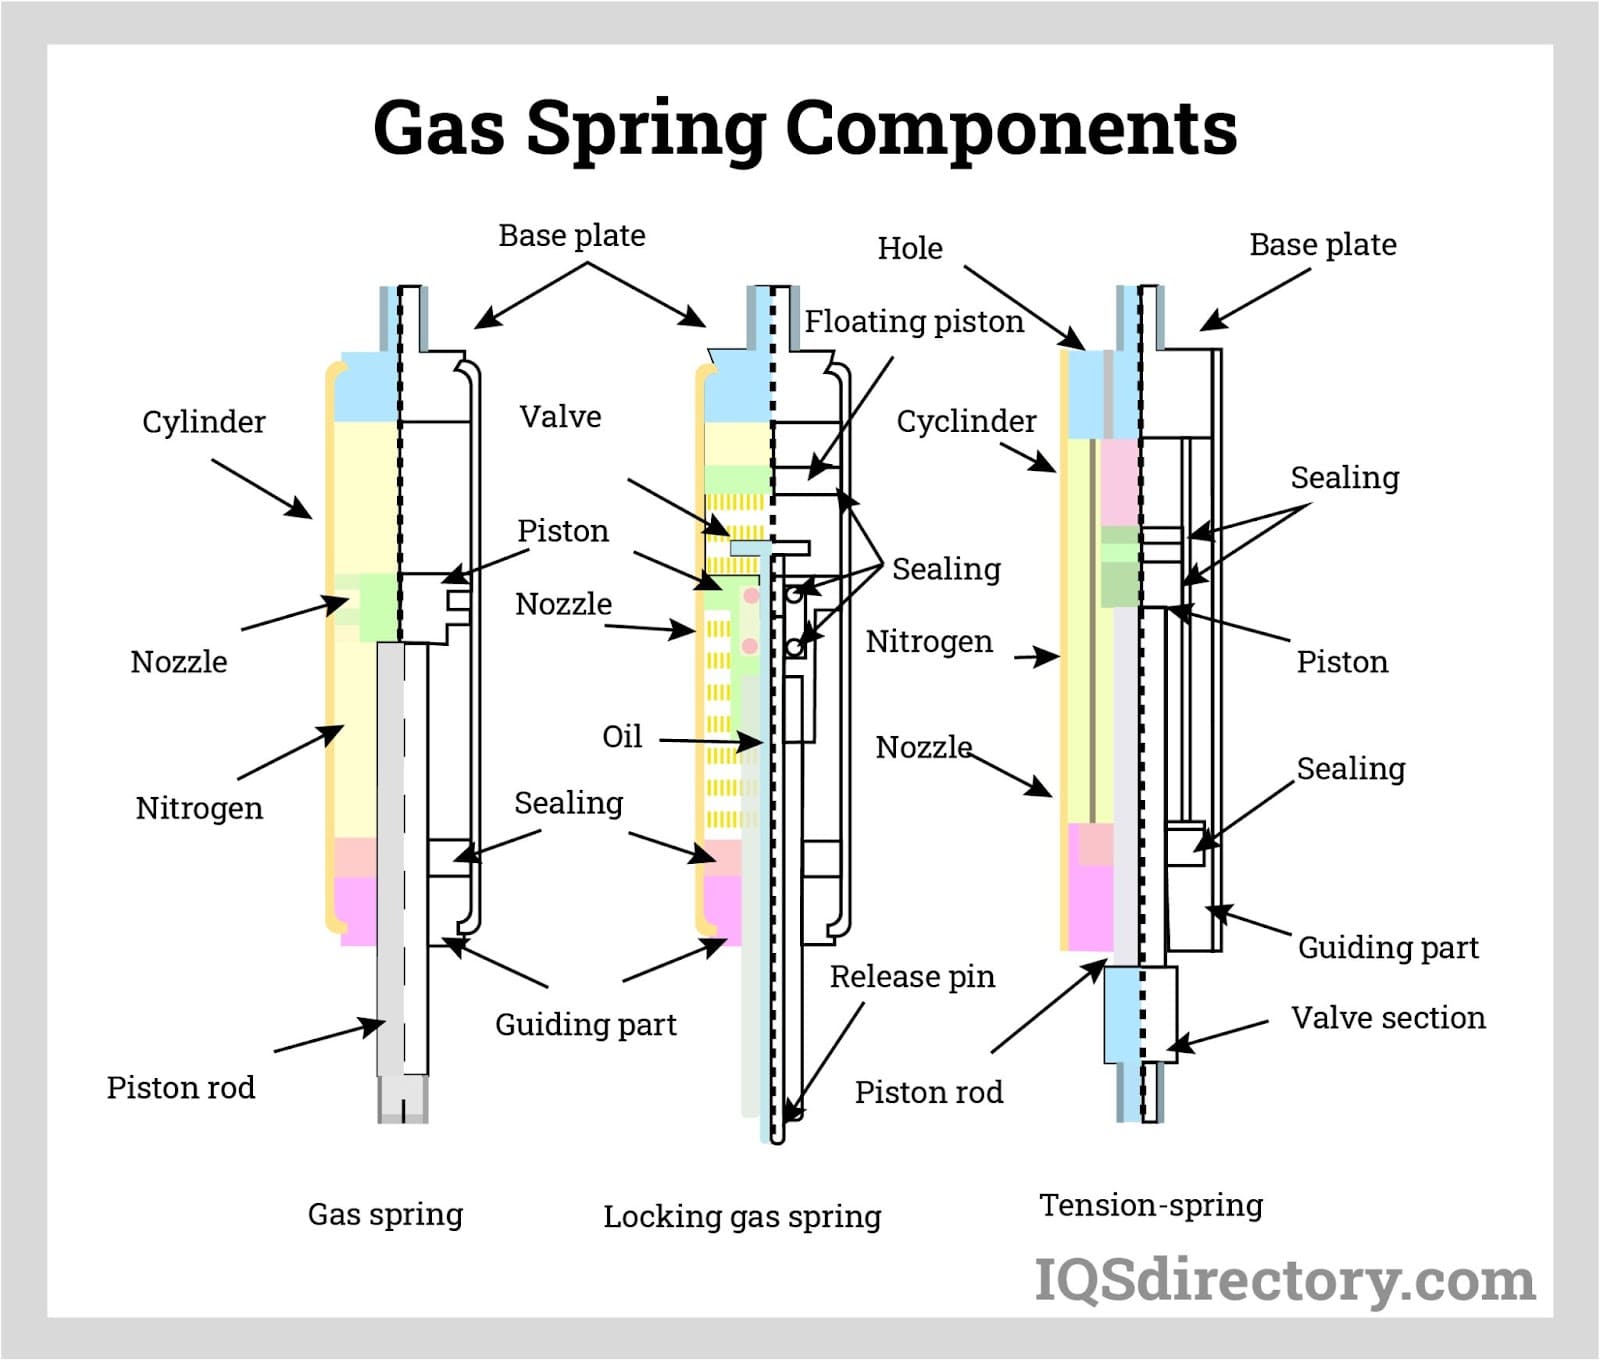 Gas Spring Components